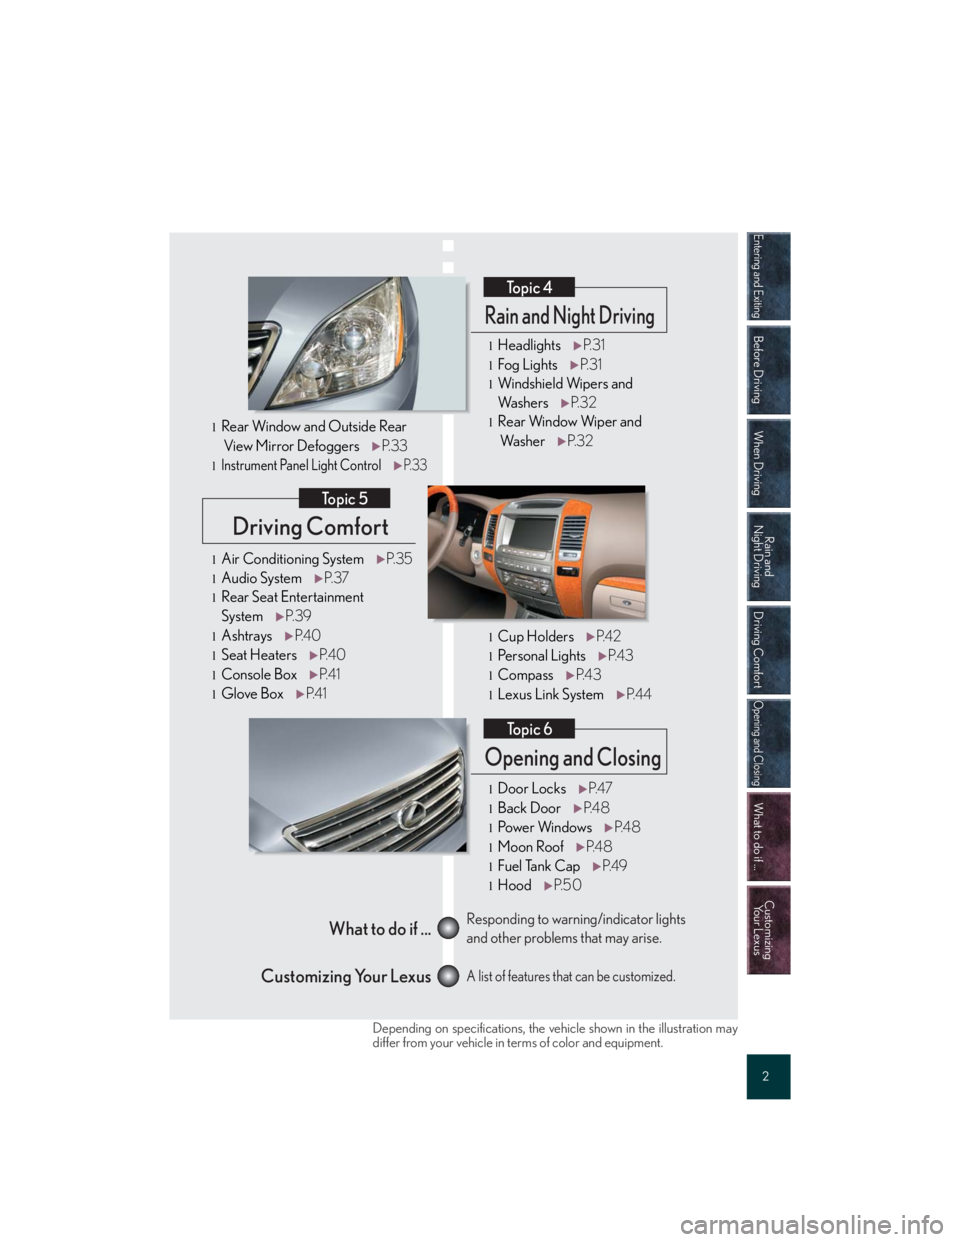 Lexus GX470 2007  Audio/Video System / LEXUS 2007 GX470 QUICK REFERENCE MANUAL Entering and Exiting
Before Driving
When Driving
Rain and 
Night Driving
Driving Comfort
Opening and Closing
What to do if ...
Customizing
Yo u r  L e x u s
2
Driving Comfort
Topic 5
Opening and Closi